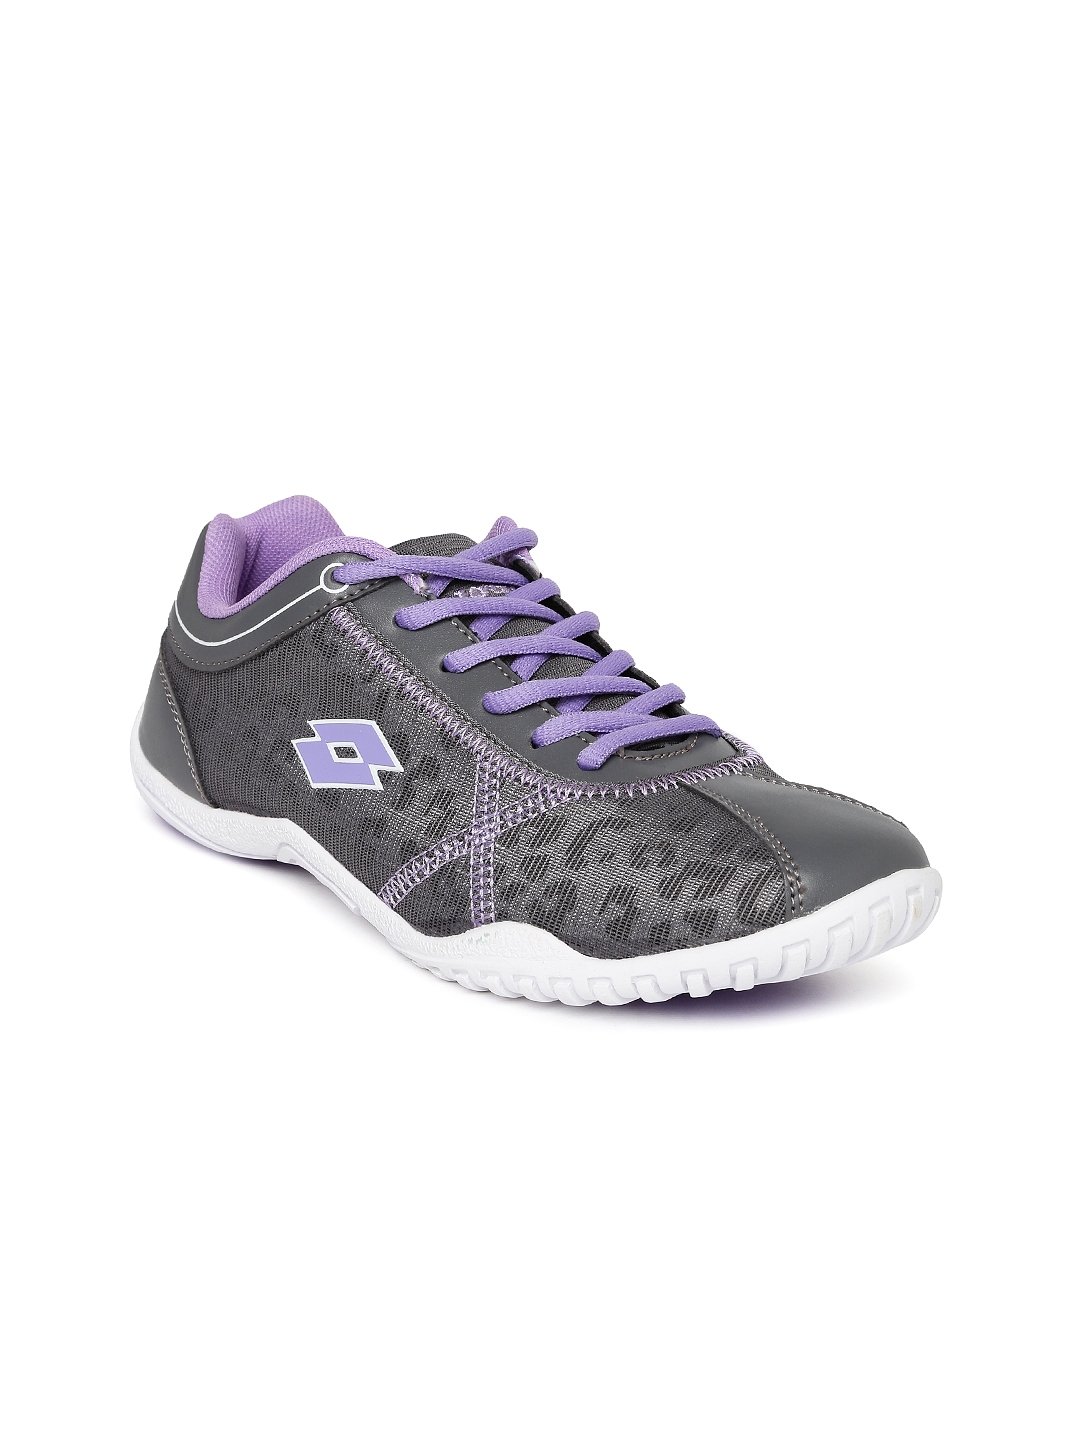 lotto womens running shoes